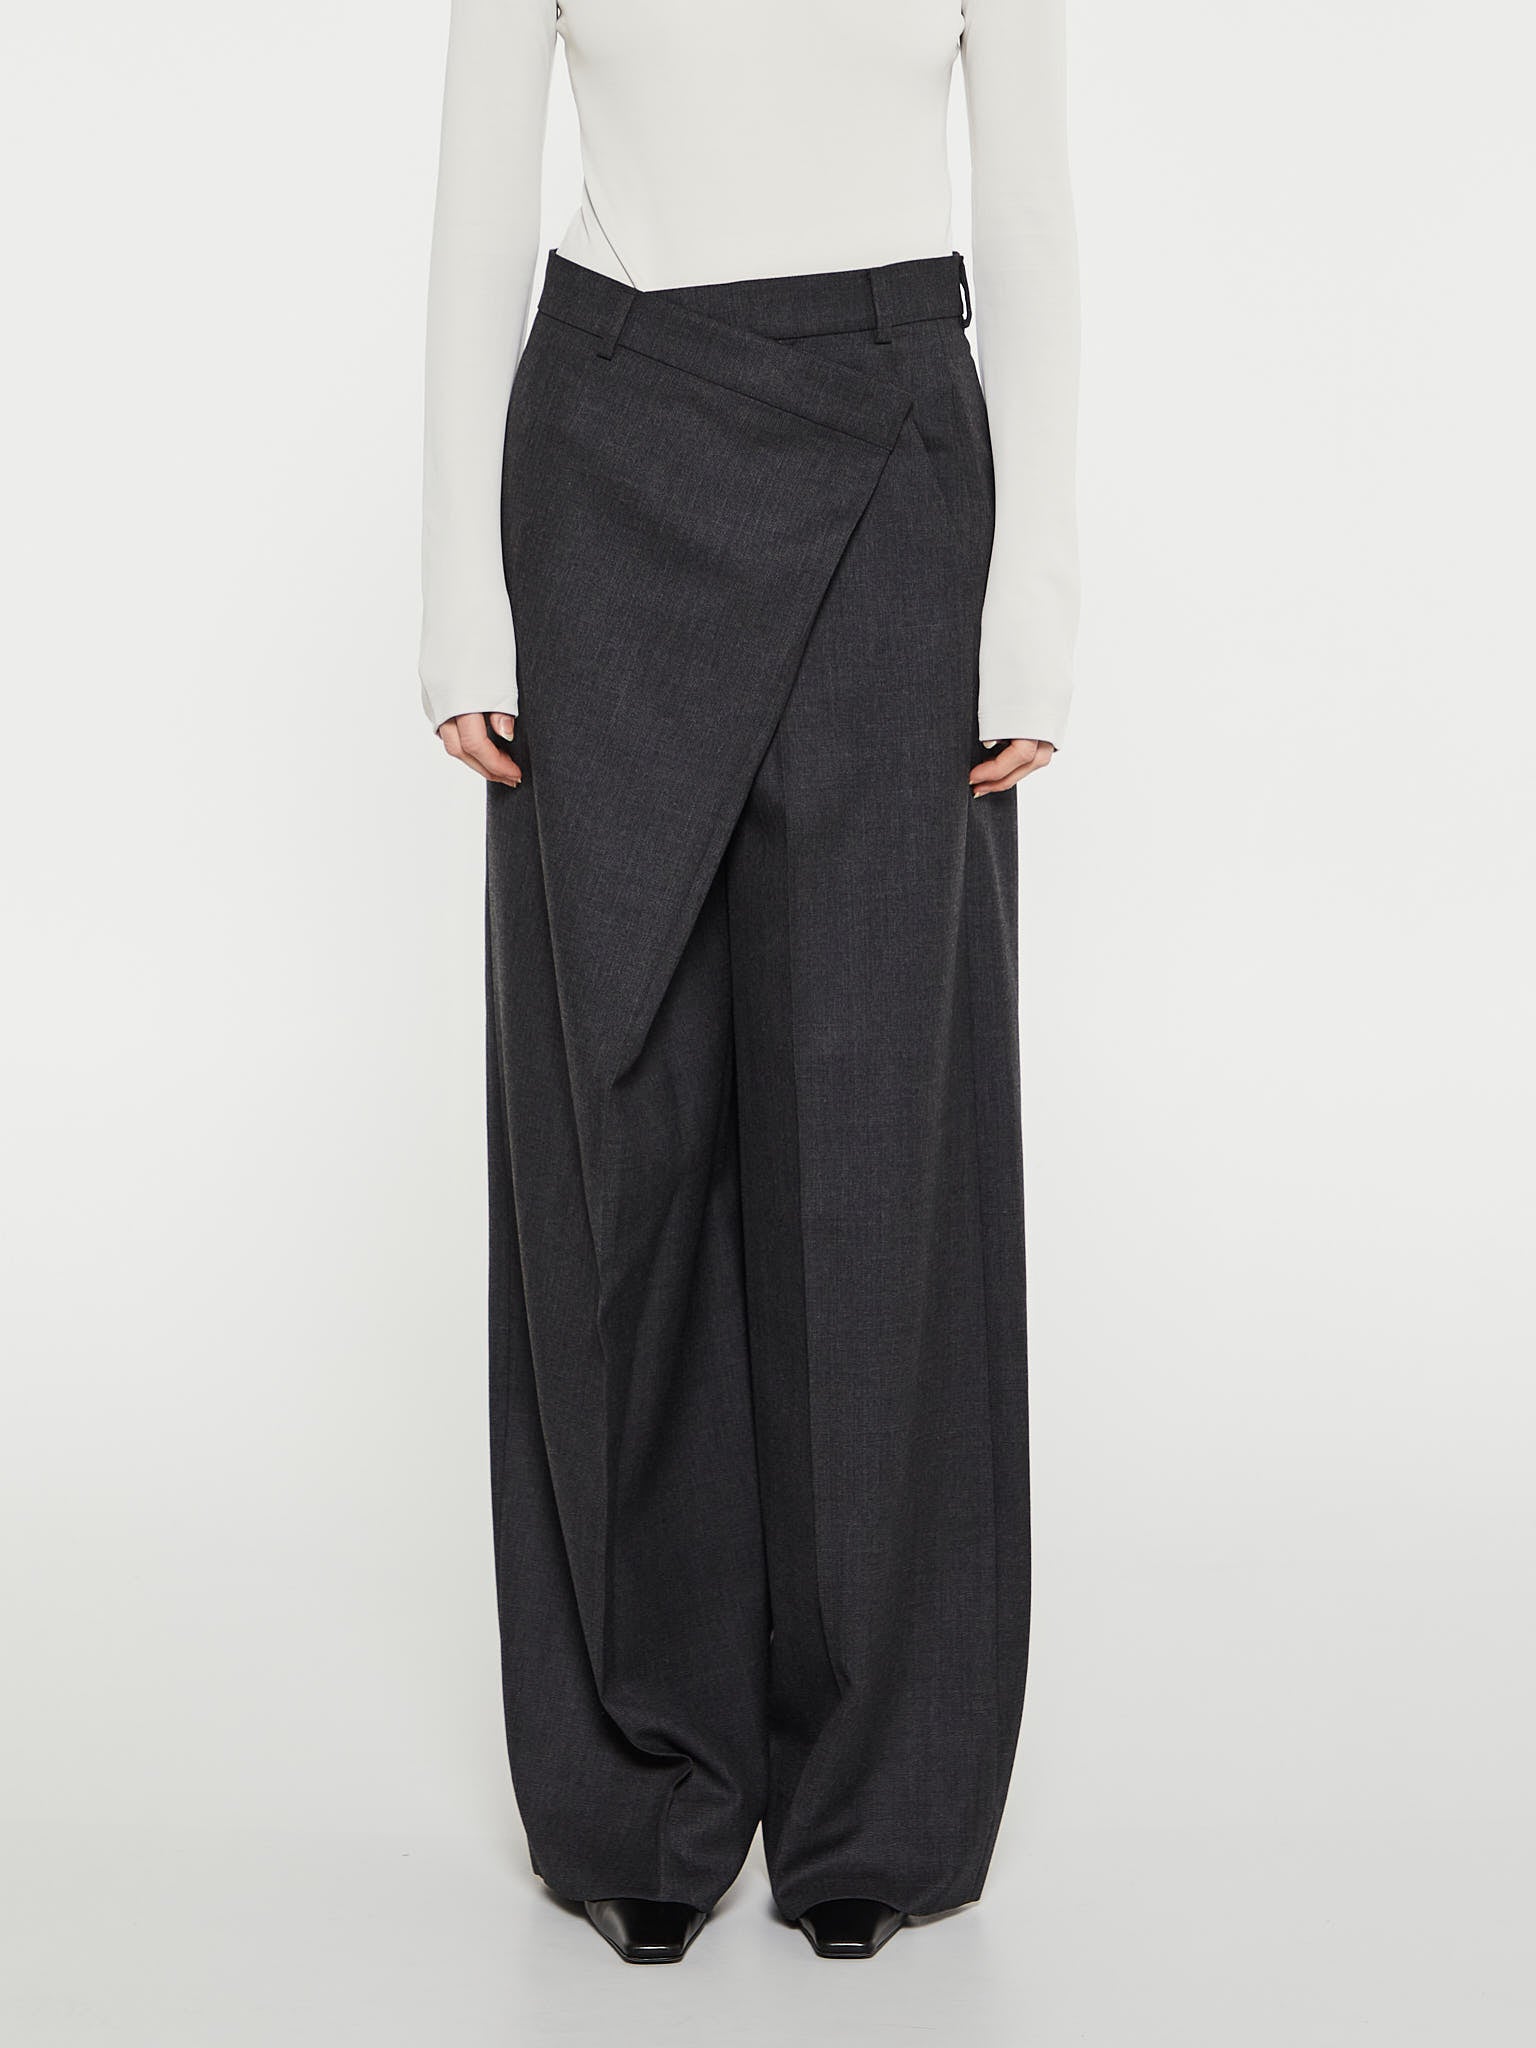 Acne Studios - Tailored Wrap Trousers in Grey